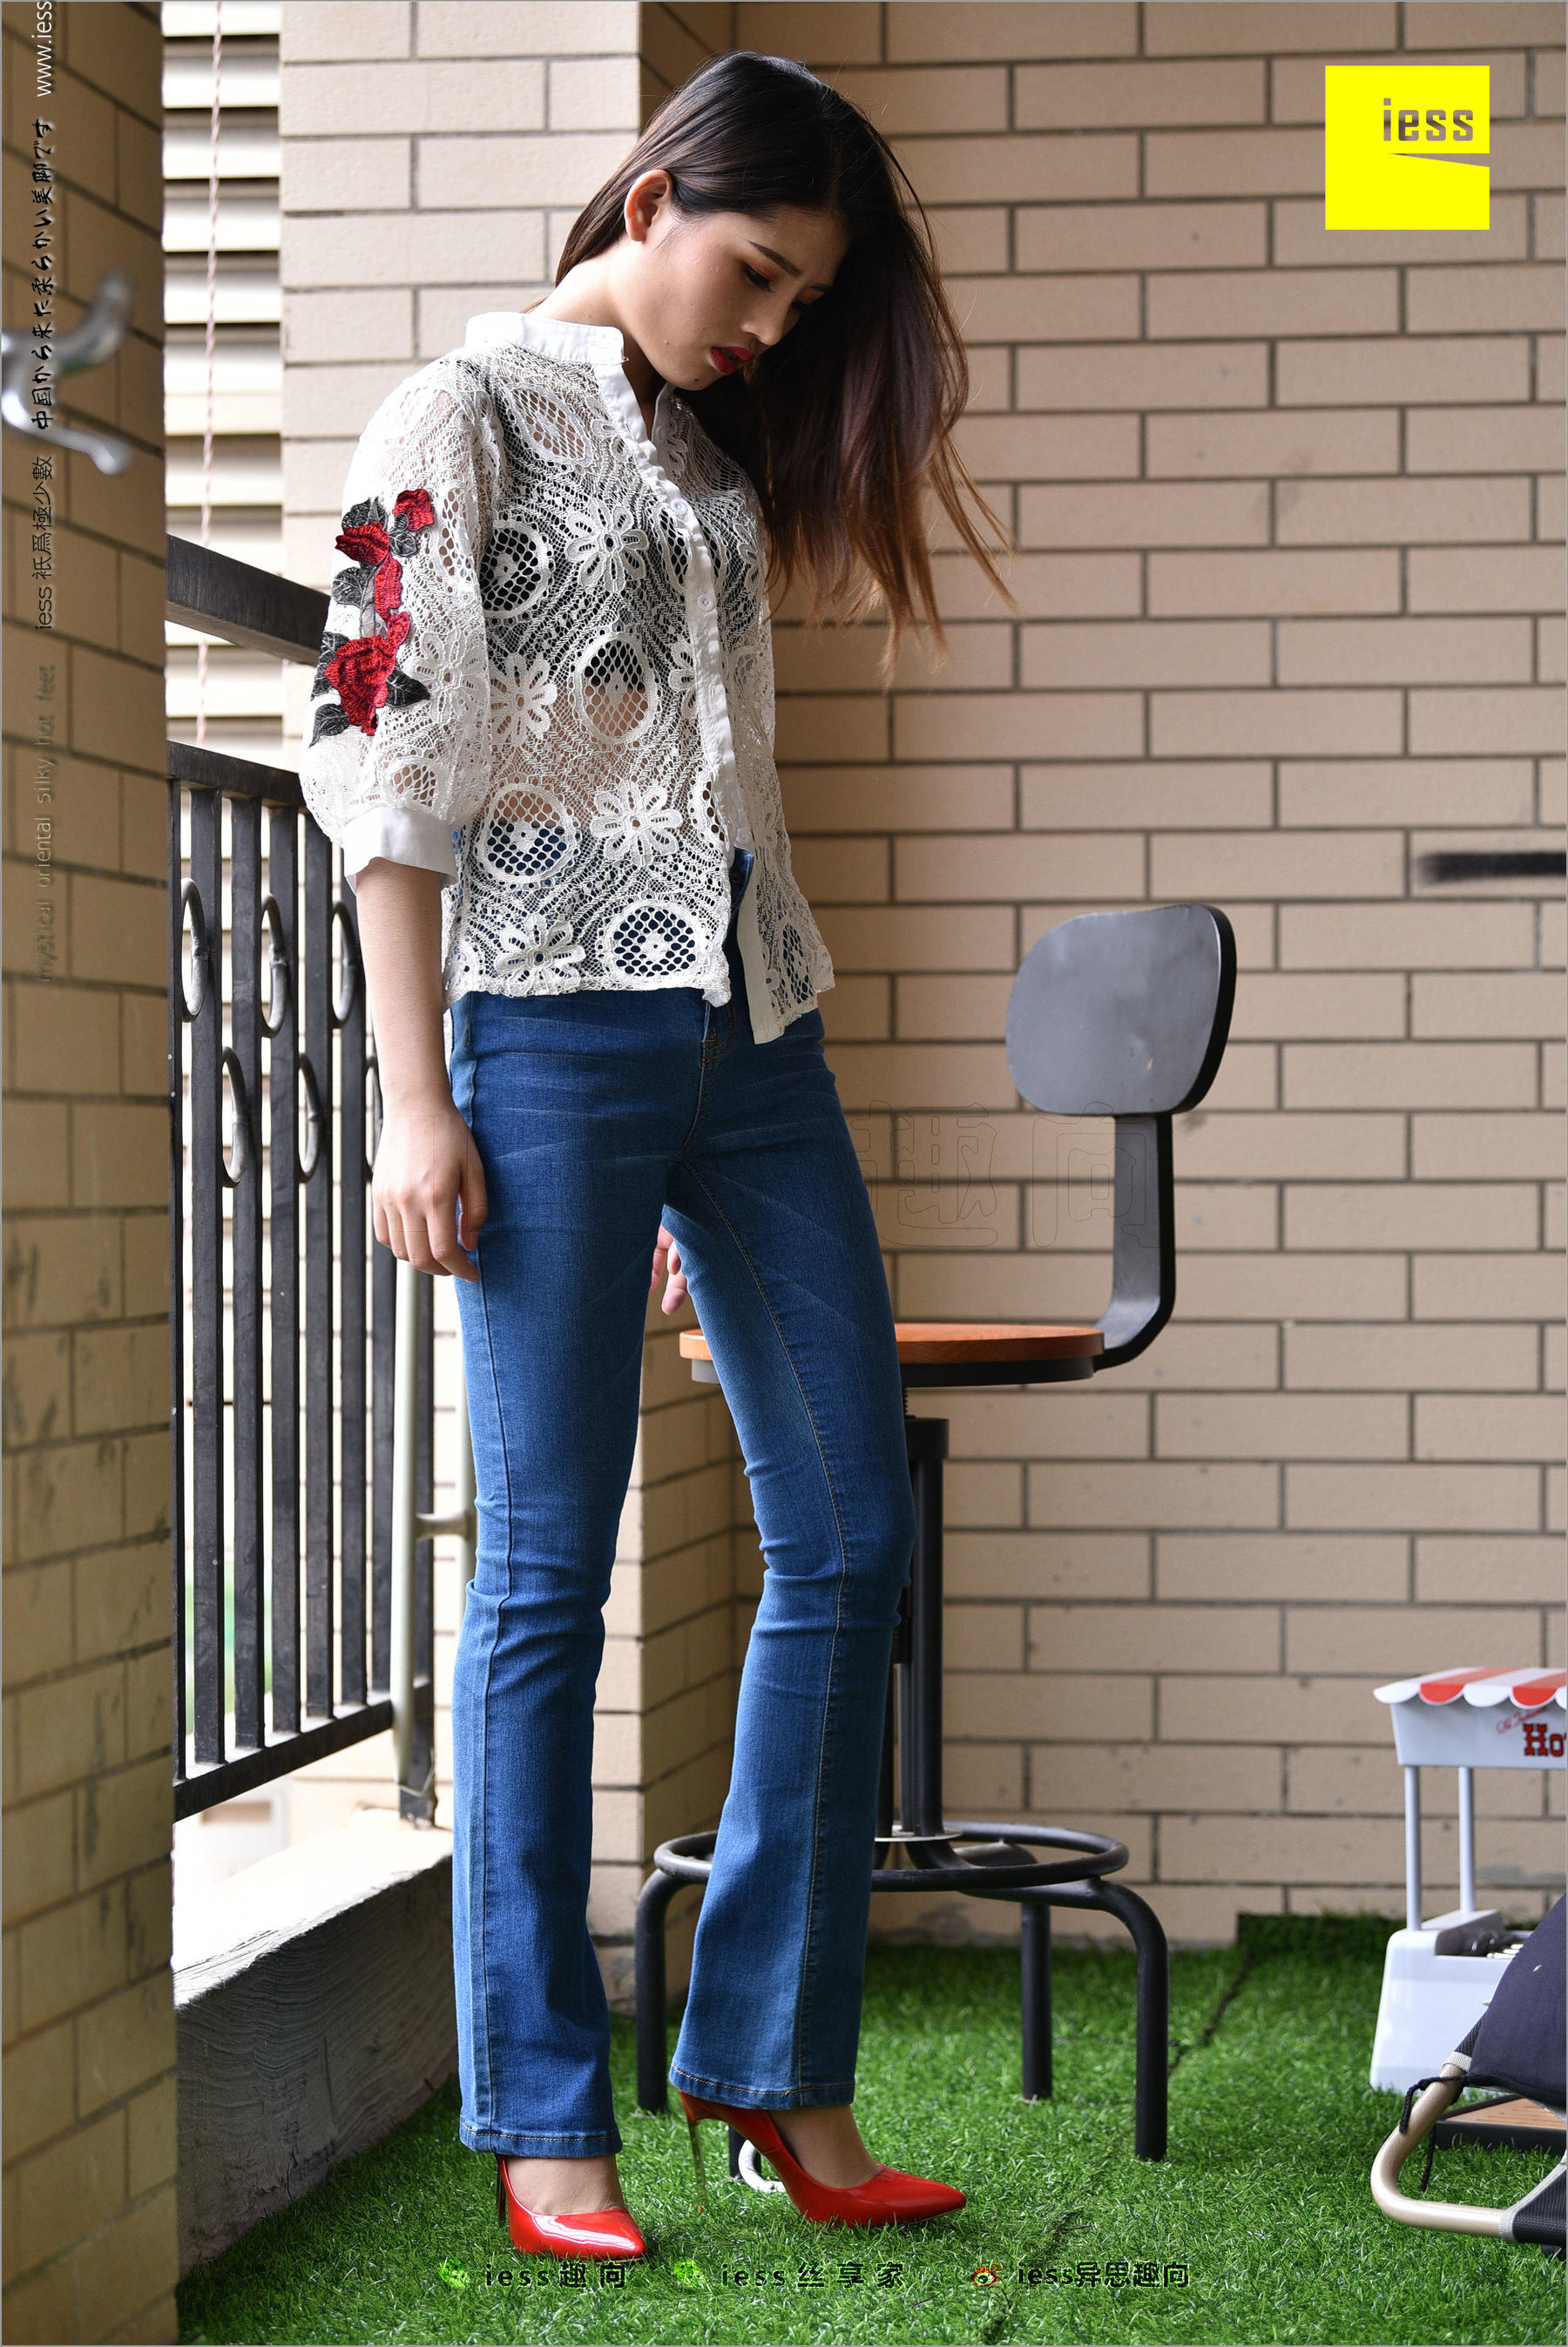 Guangyan's Jeans, New Models and Red High Heels